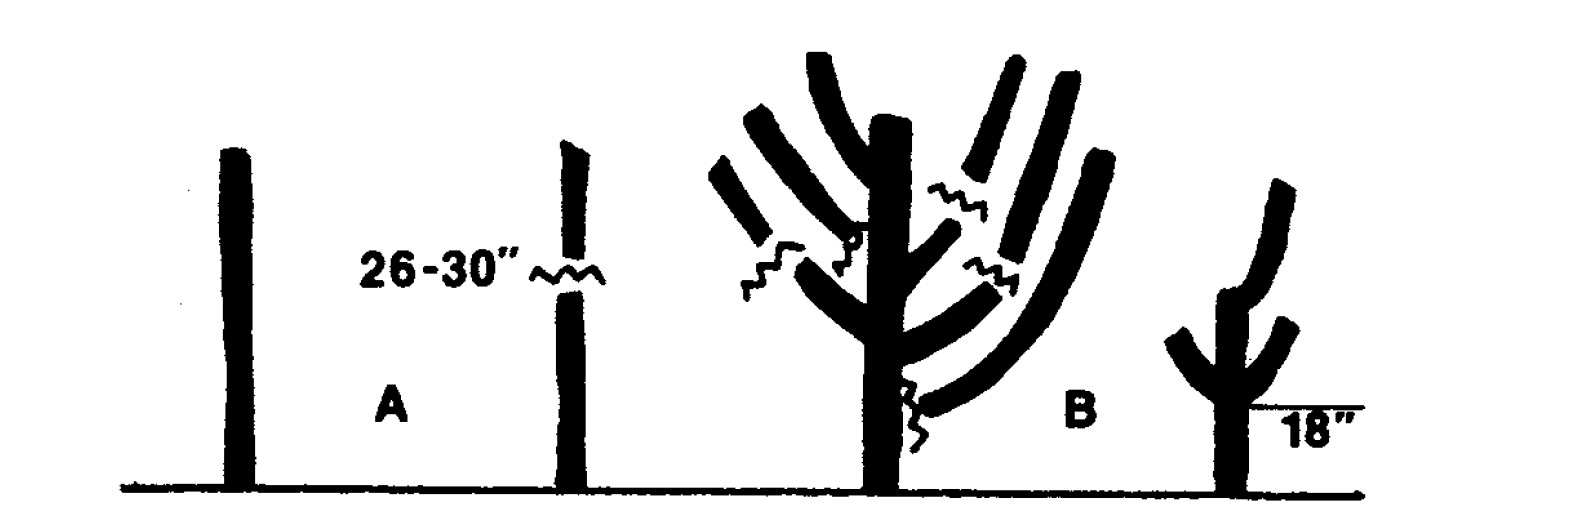 An Illustration showing peach trees proned 30 inches in height and above lateral branches. 